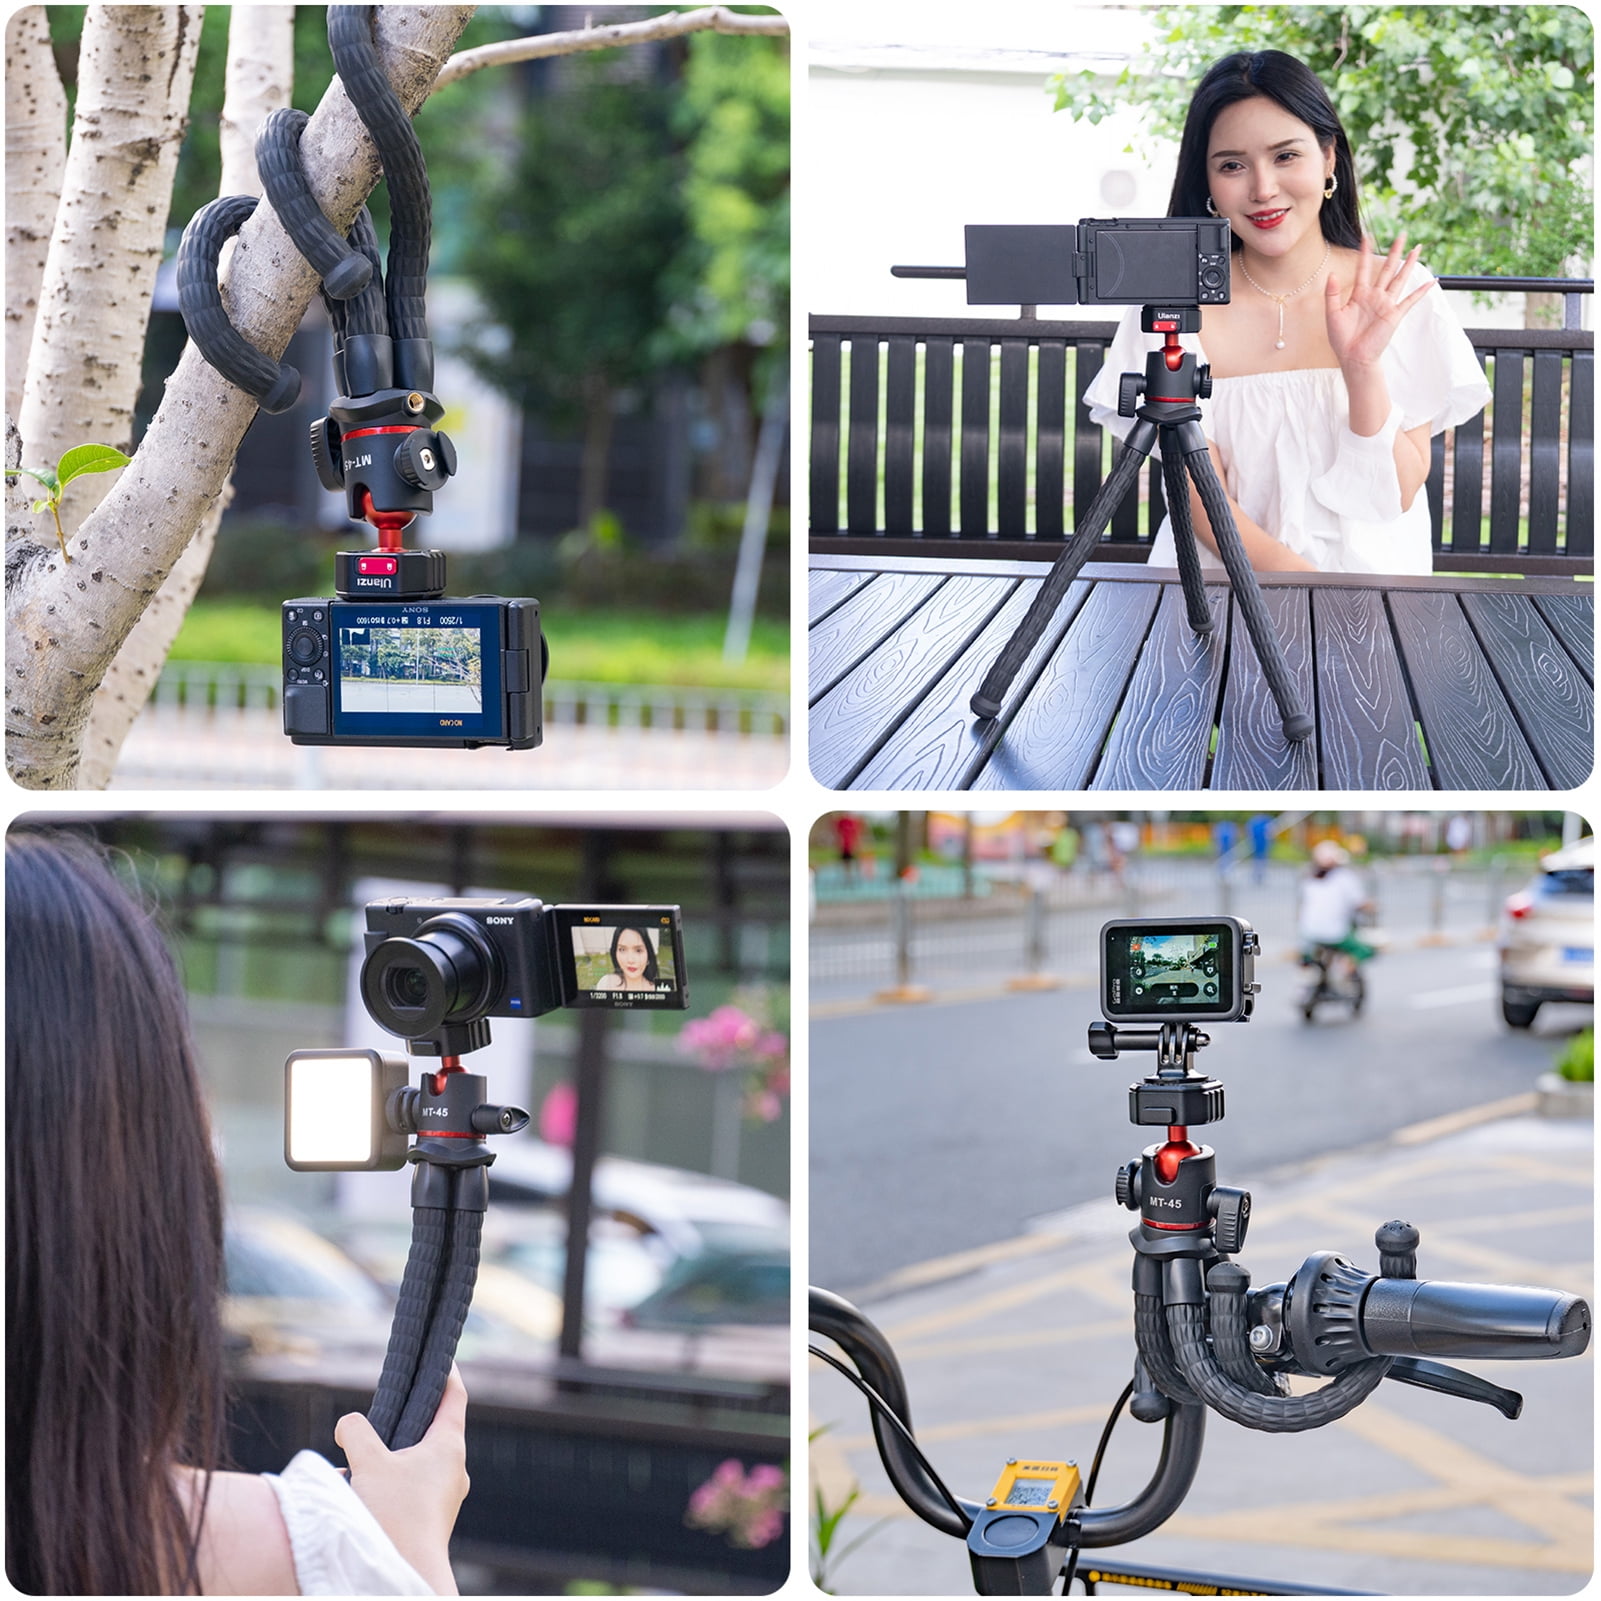 Funien MT-45 Multi-functional Flexible Octopus Tripod Stand with Quick Release Mount 360° Rotatable Ballhead Cold Shoe for Vlog Live Streaming Travel Pgraphy